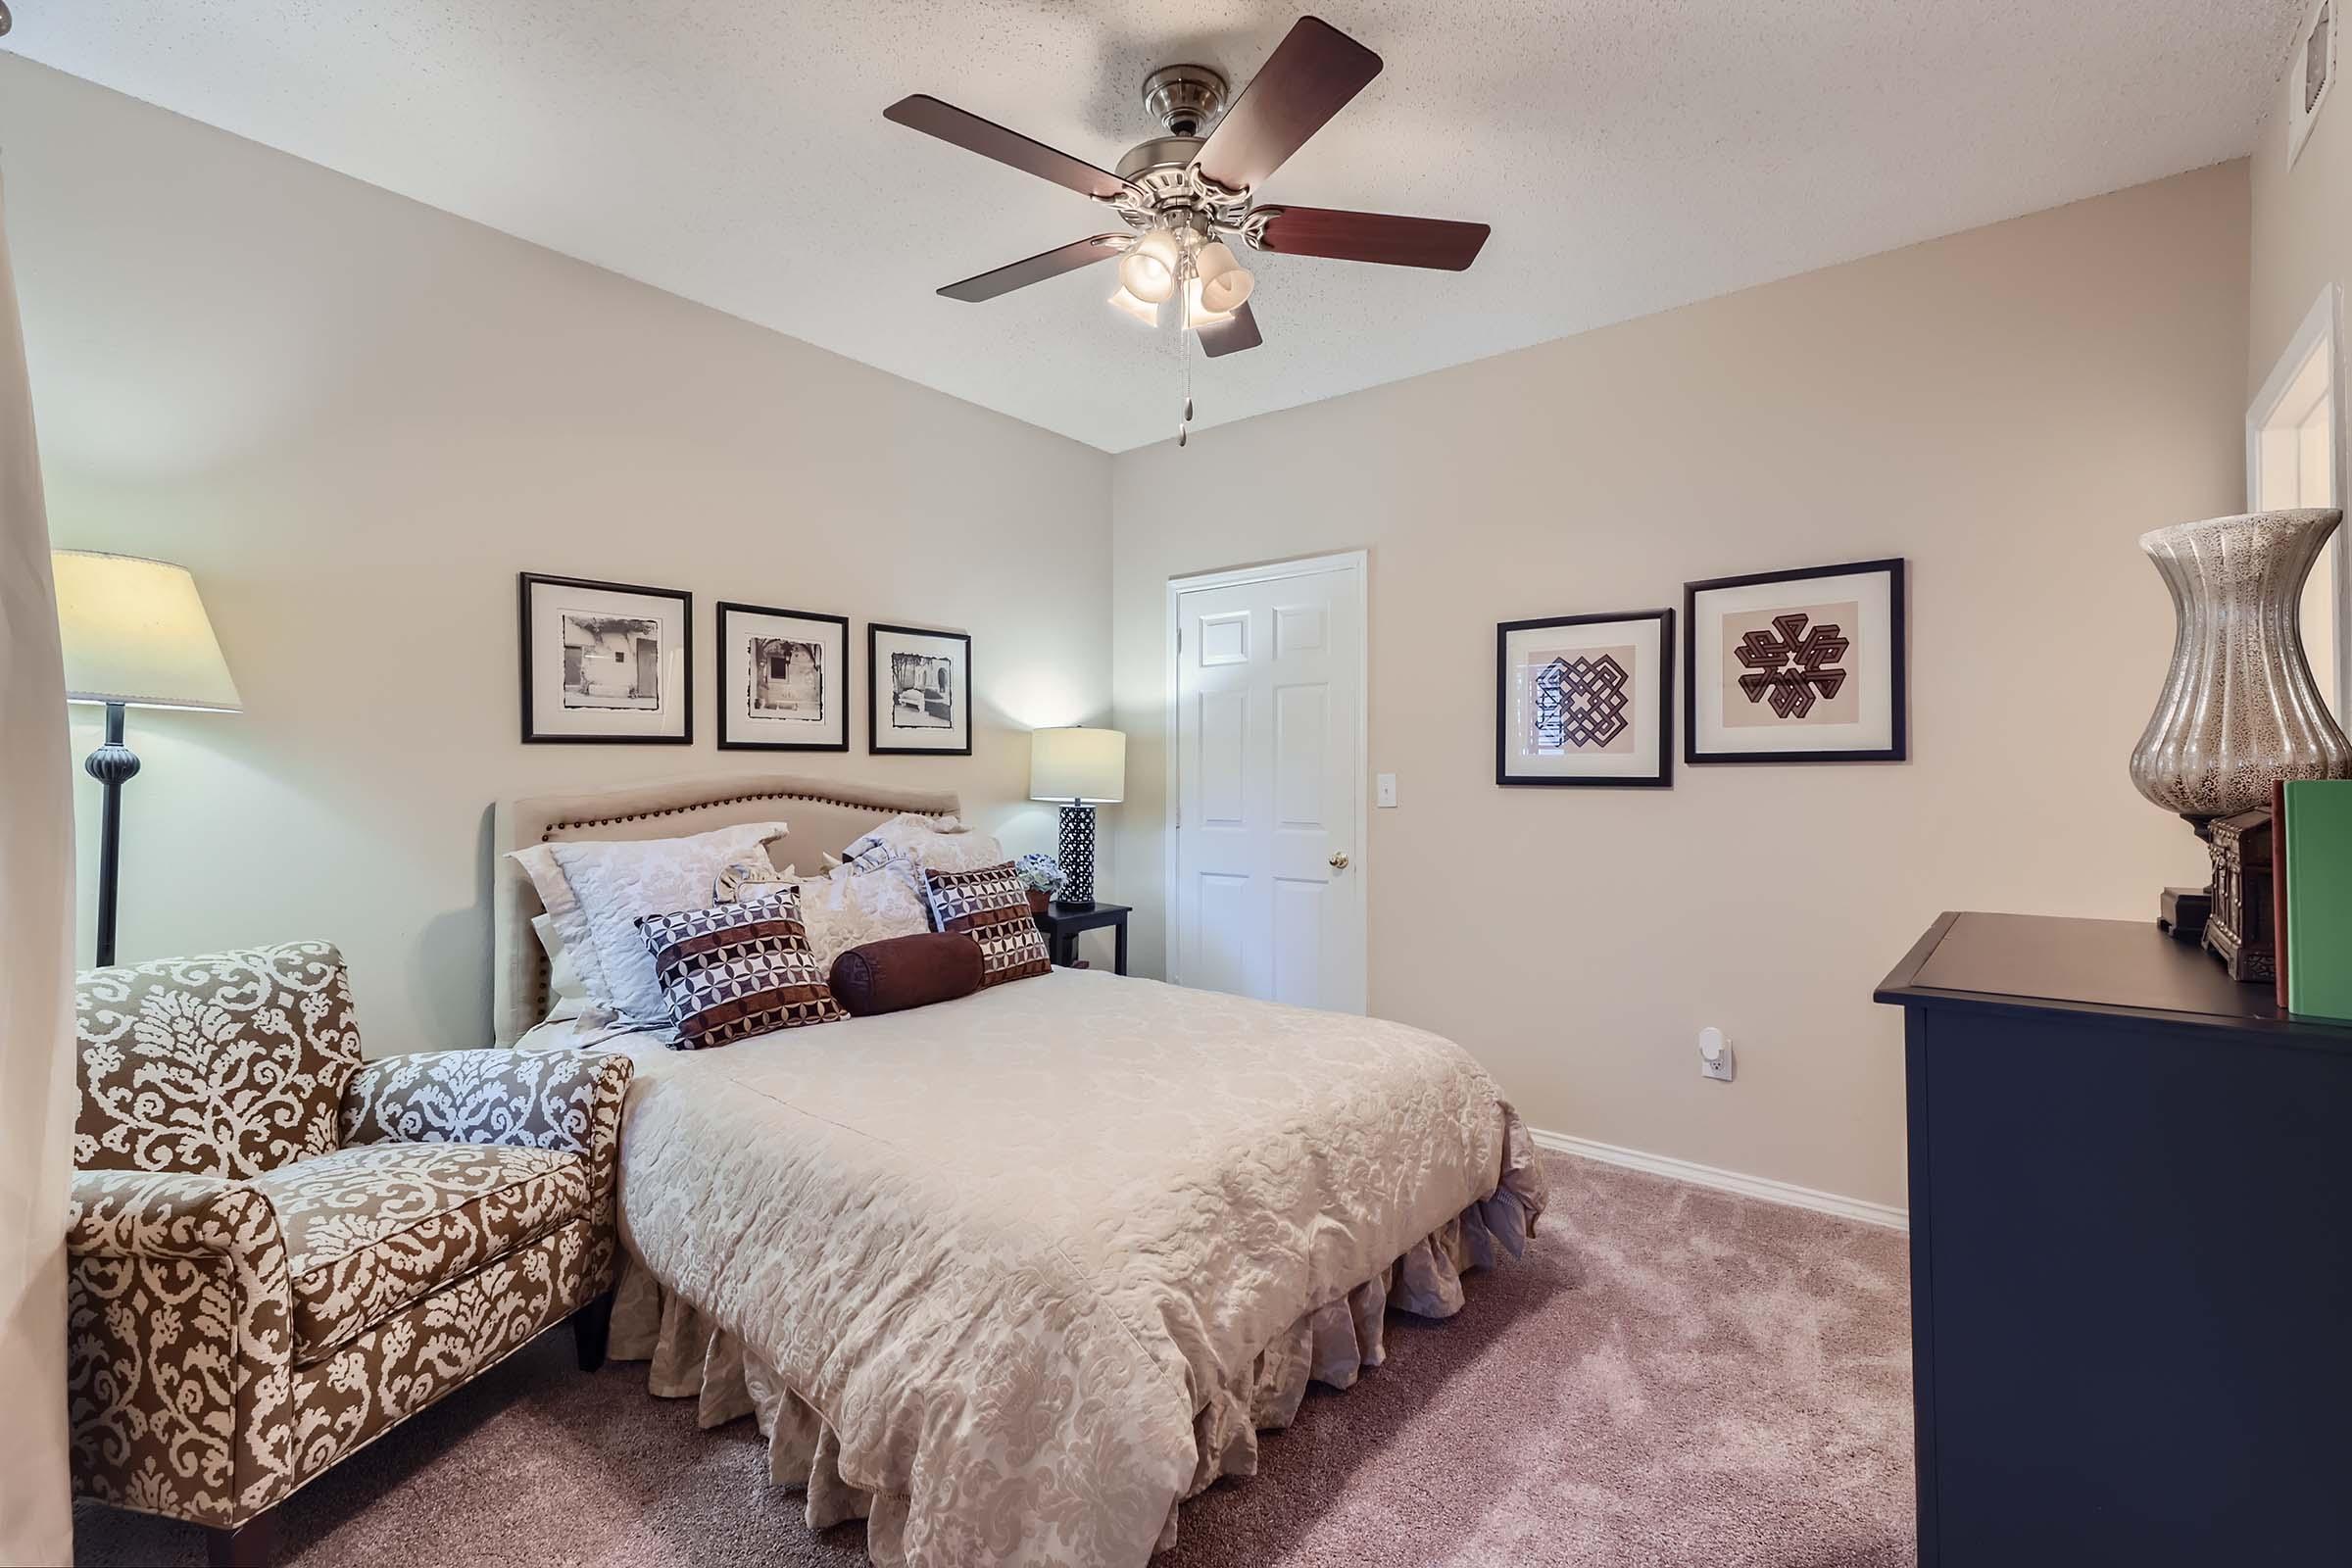 A model carpeted bedroom with a queen bed and a ceiling fan at Rise Skyline.